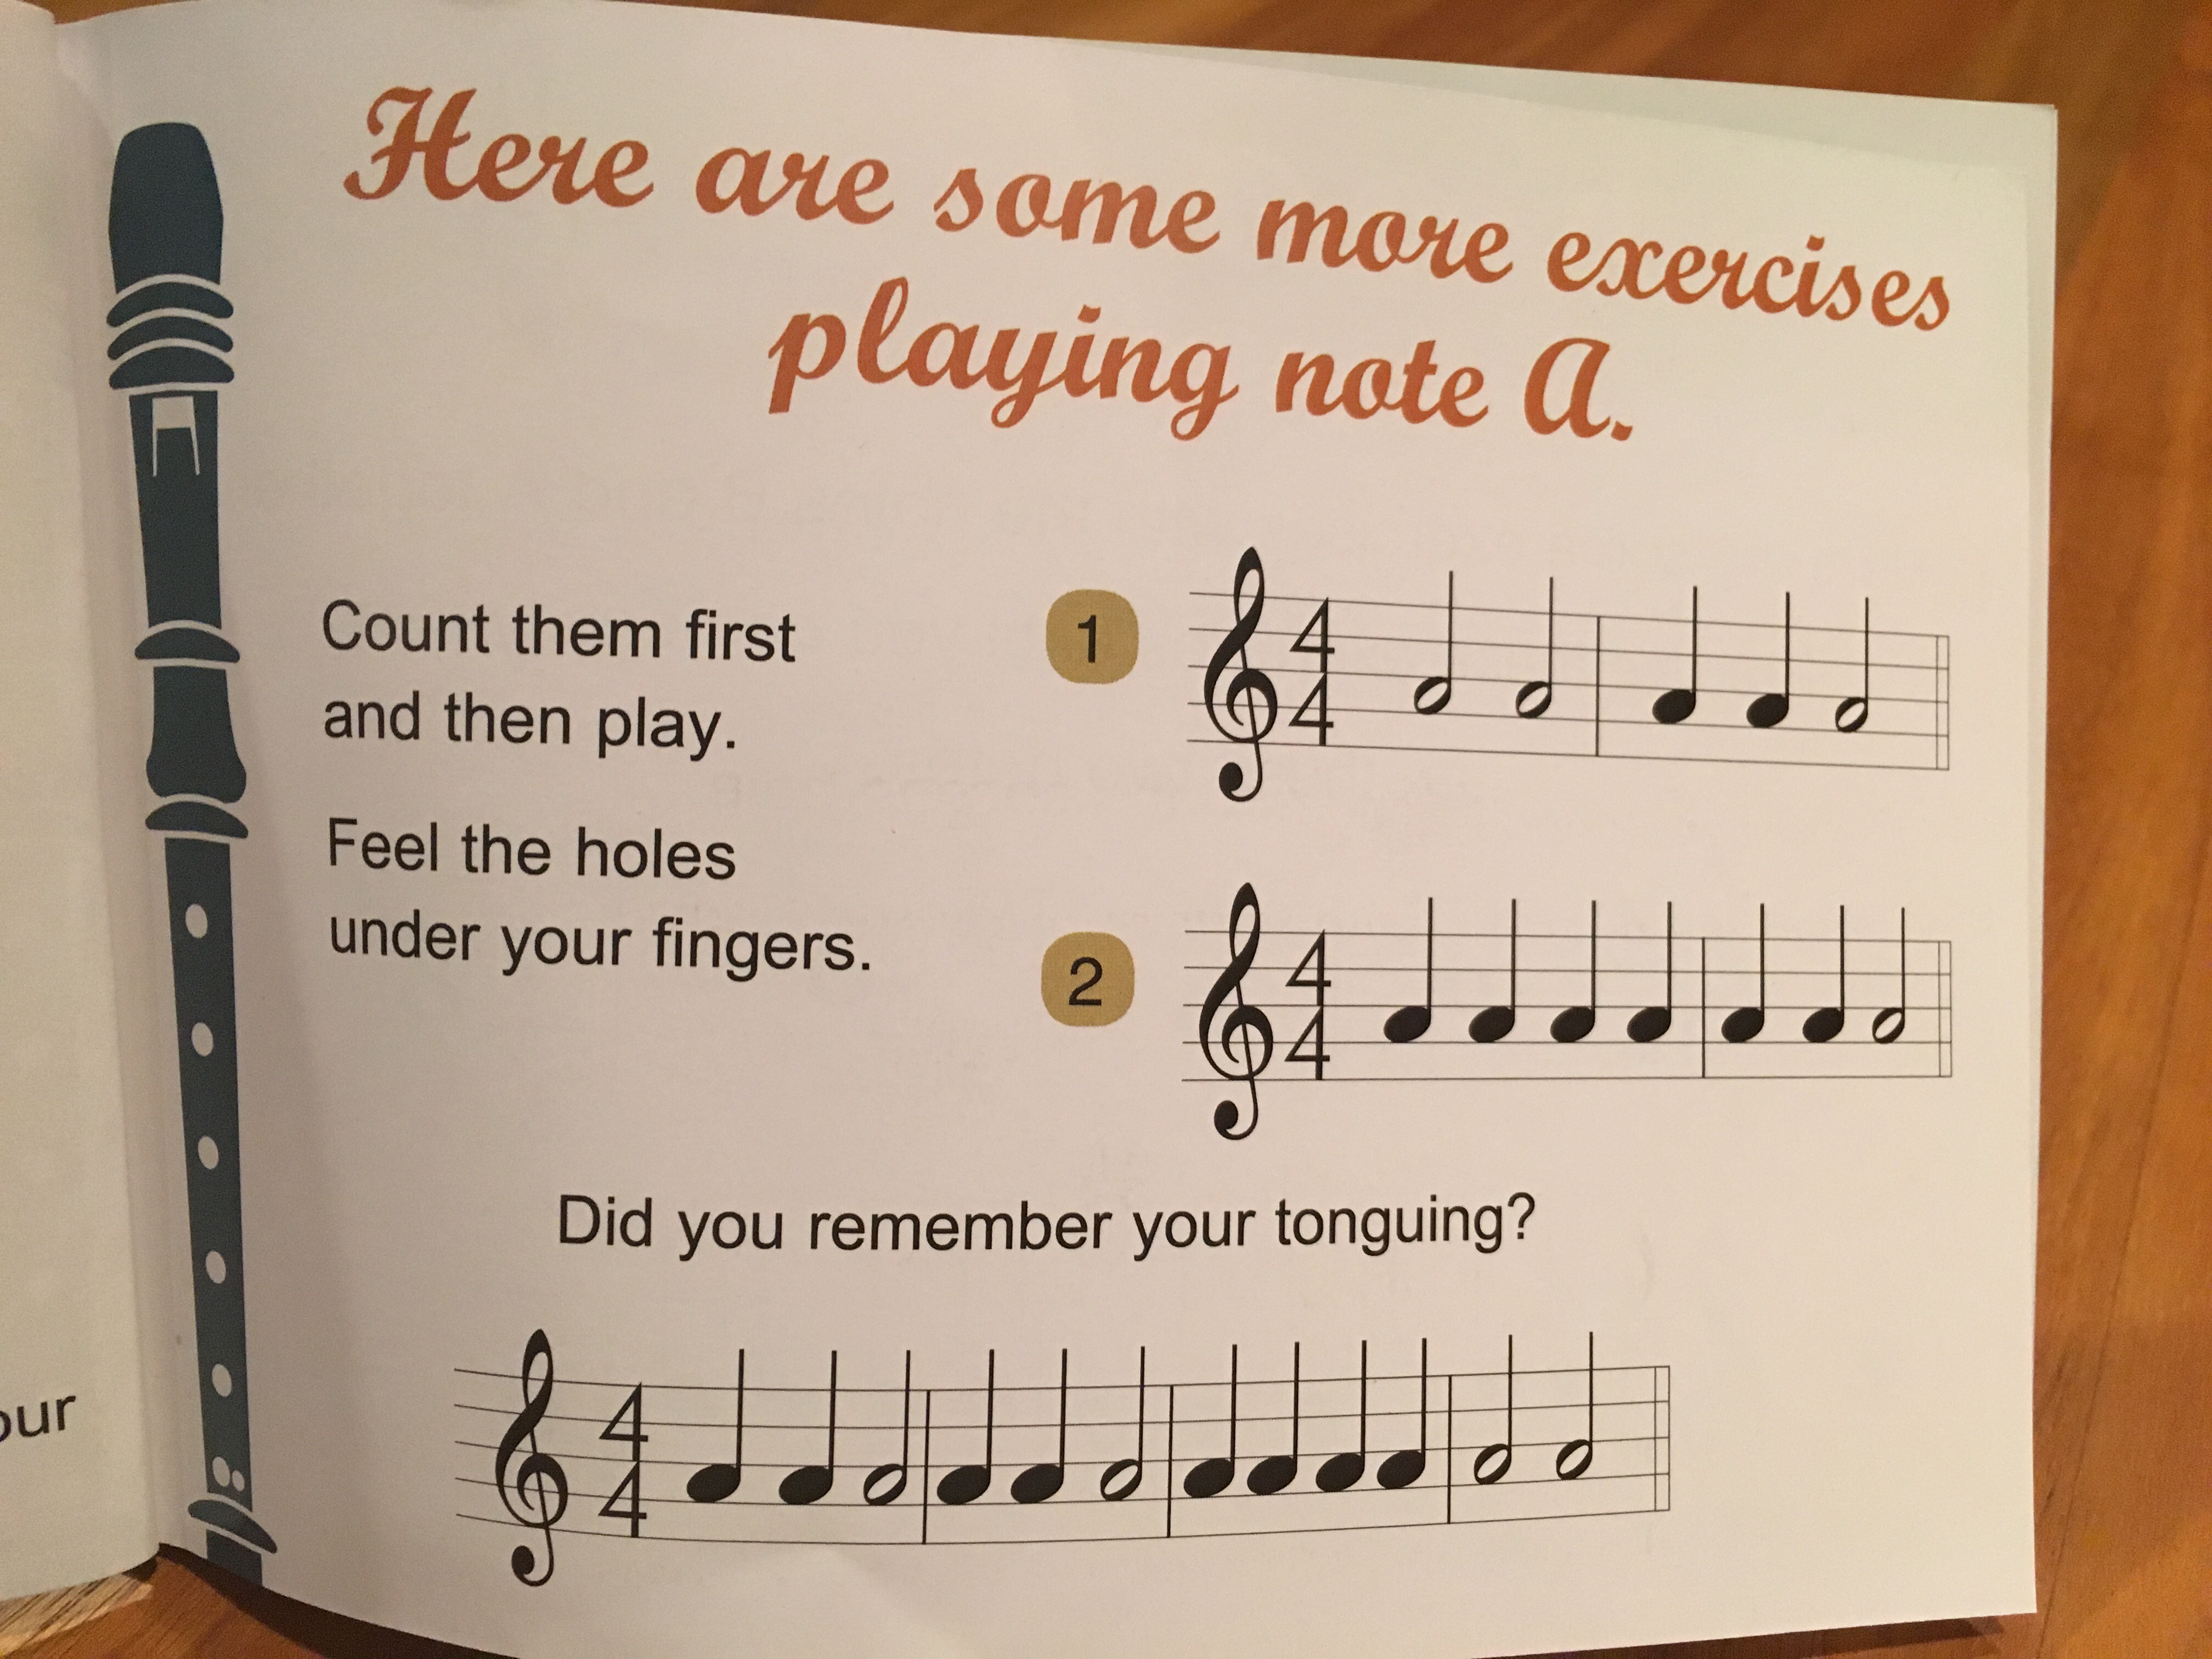 Here are some more exercises playing note A.